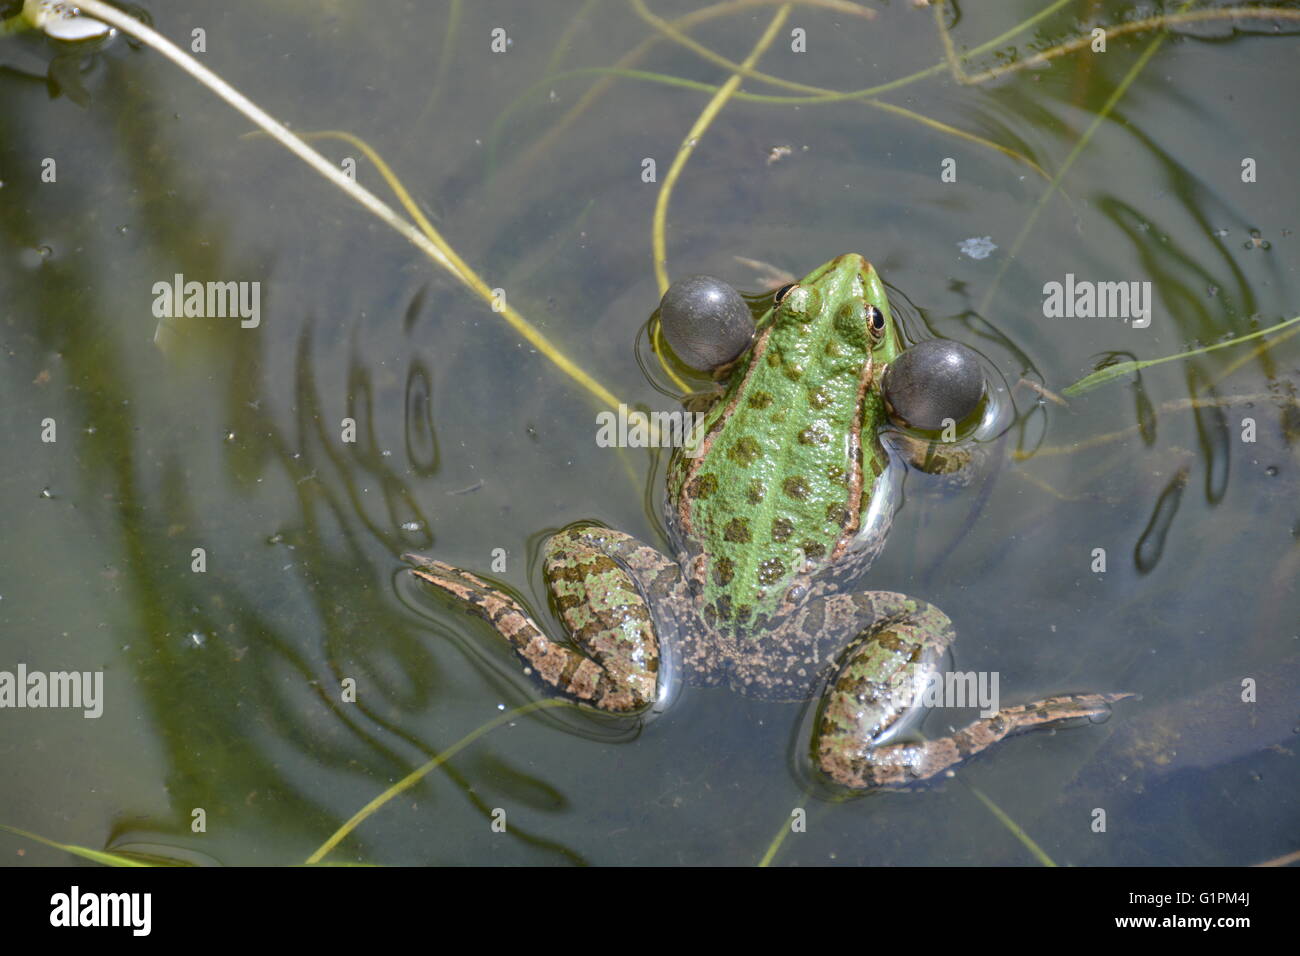 Marsh frog with inflated vocal sacks croaking and creating ripples in the pond water. Stock Photo